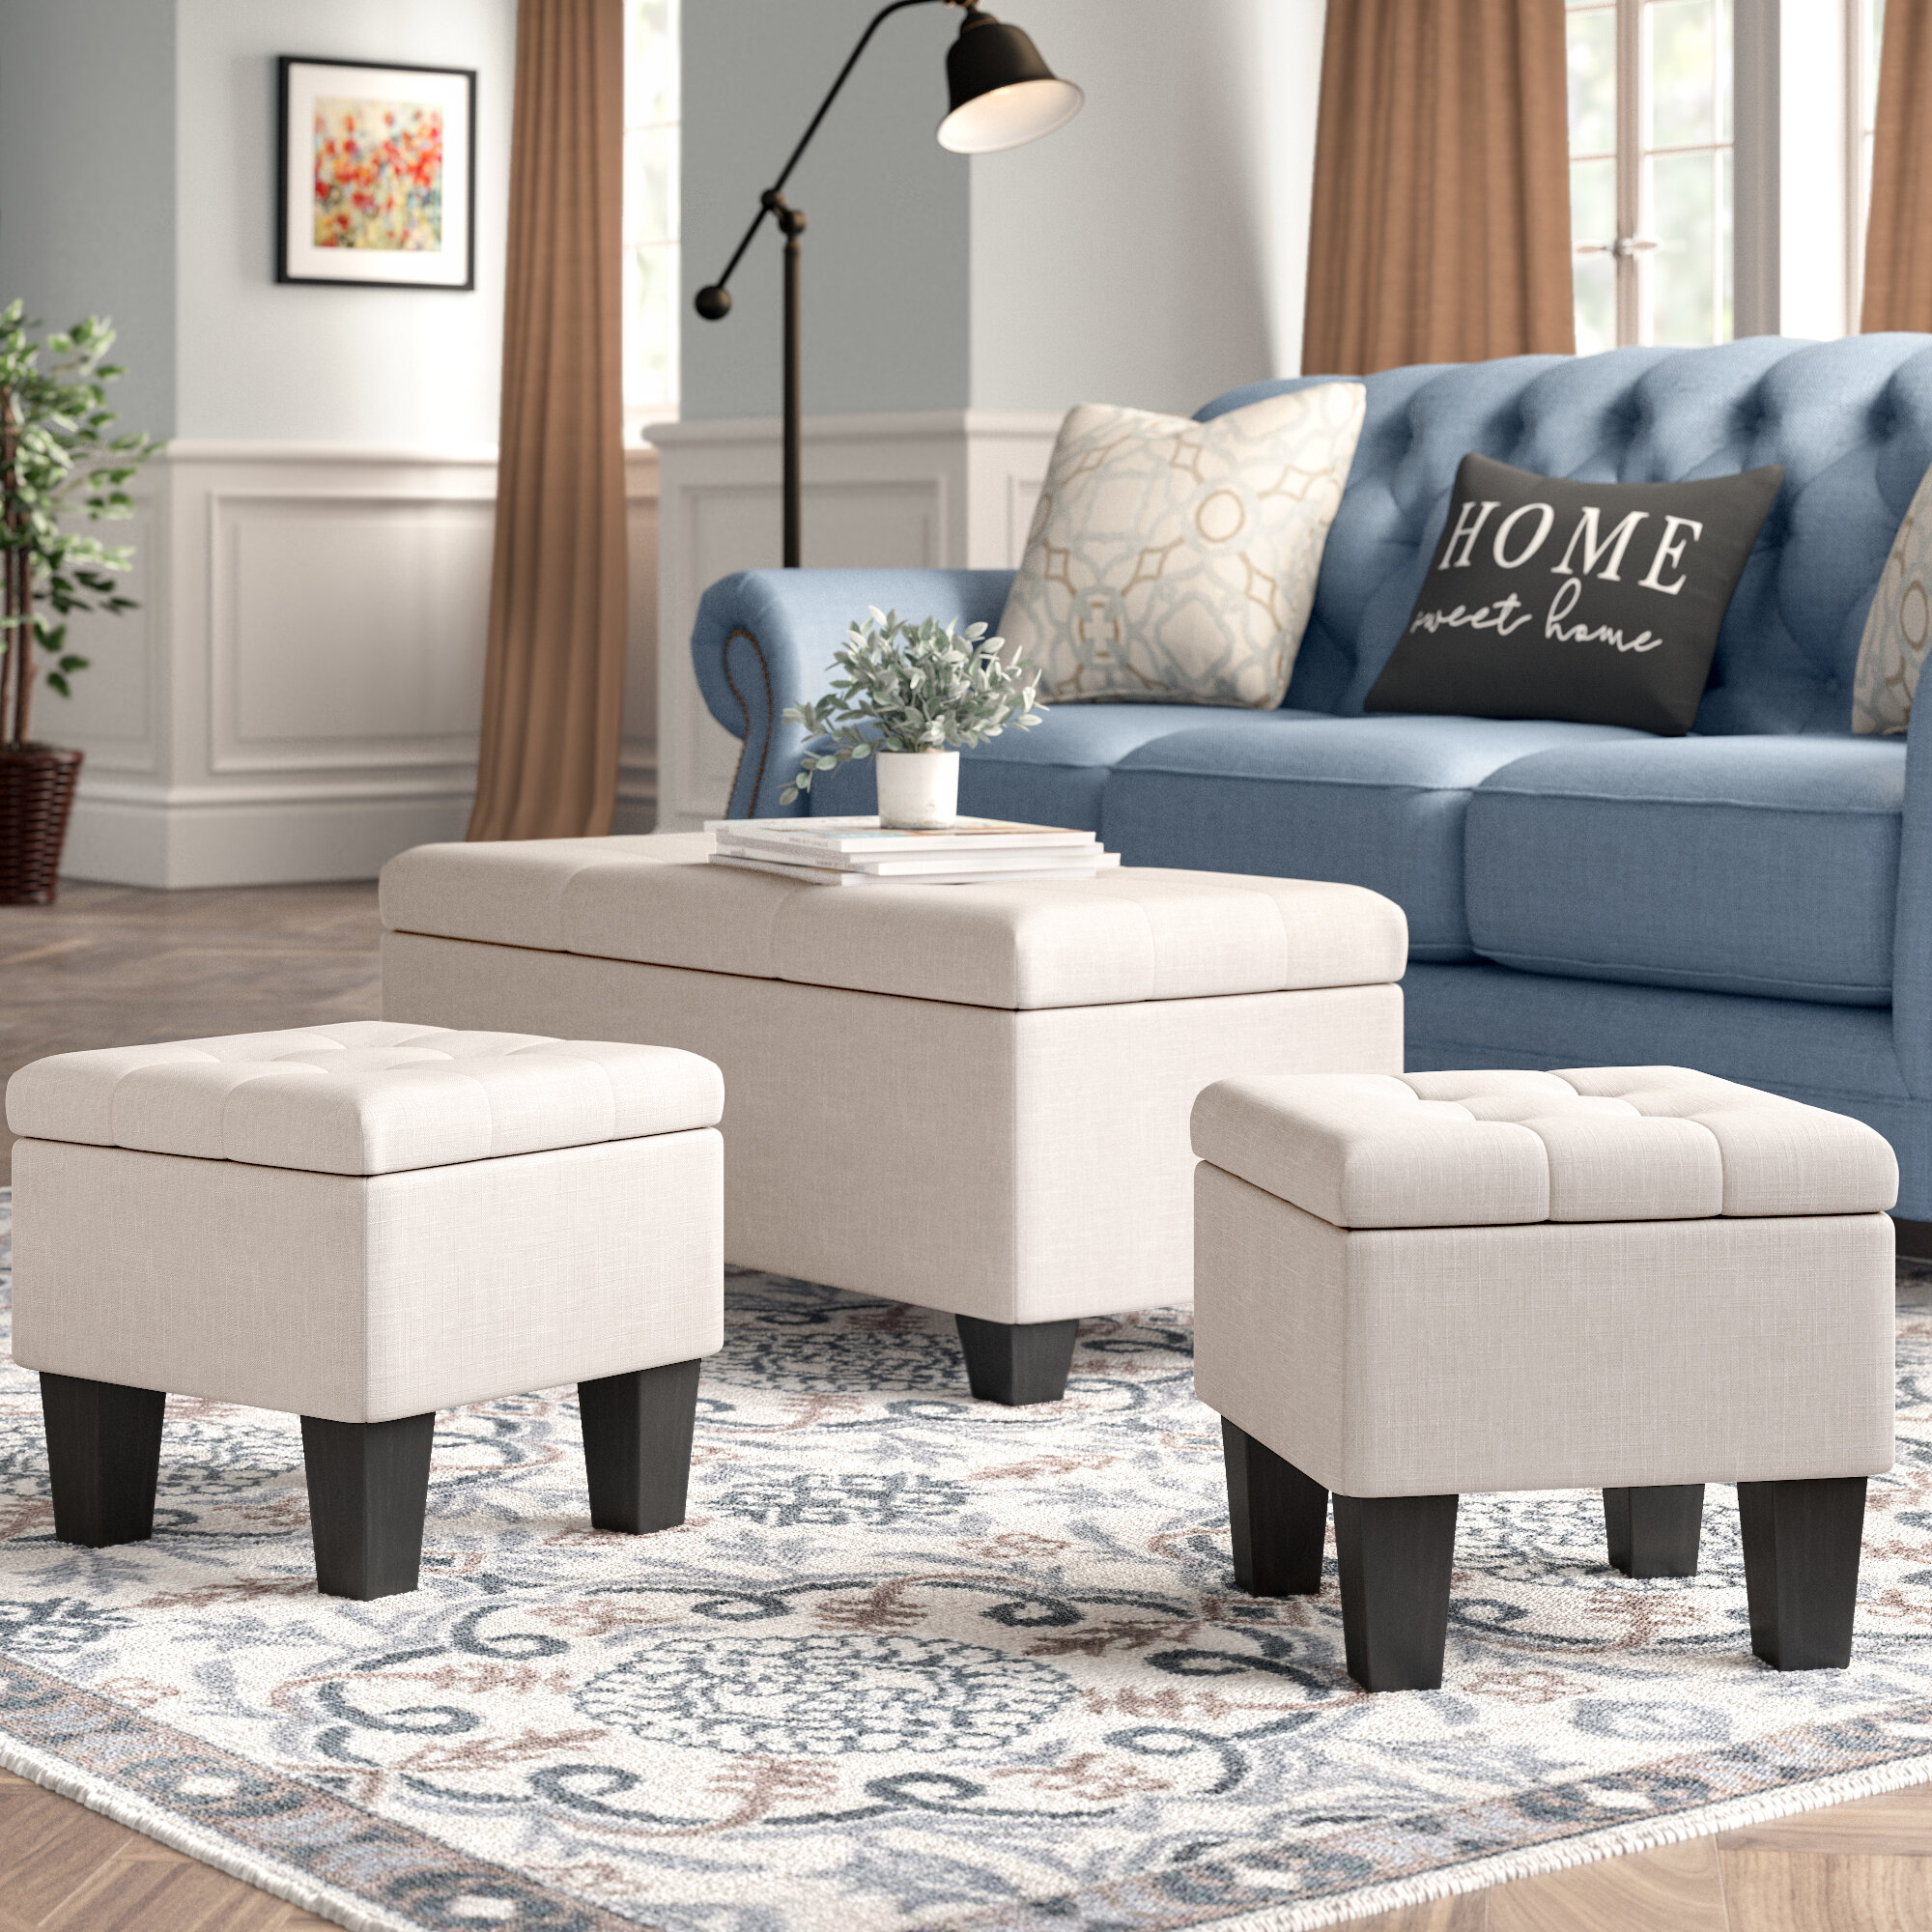 Chair And Storage Ottoman Set / Cr Laine Furniture / Check out our